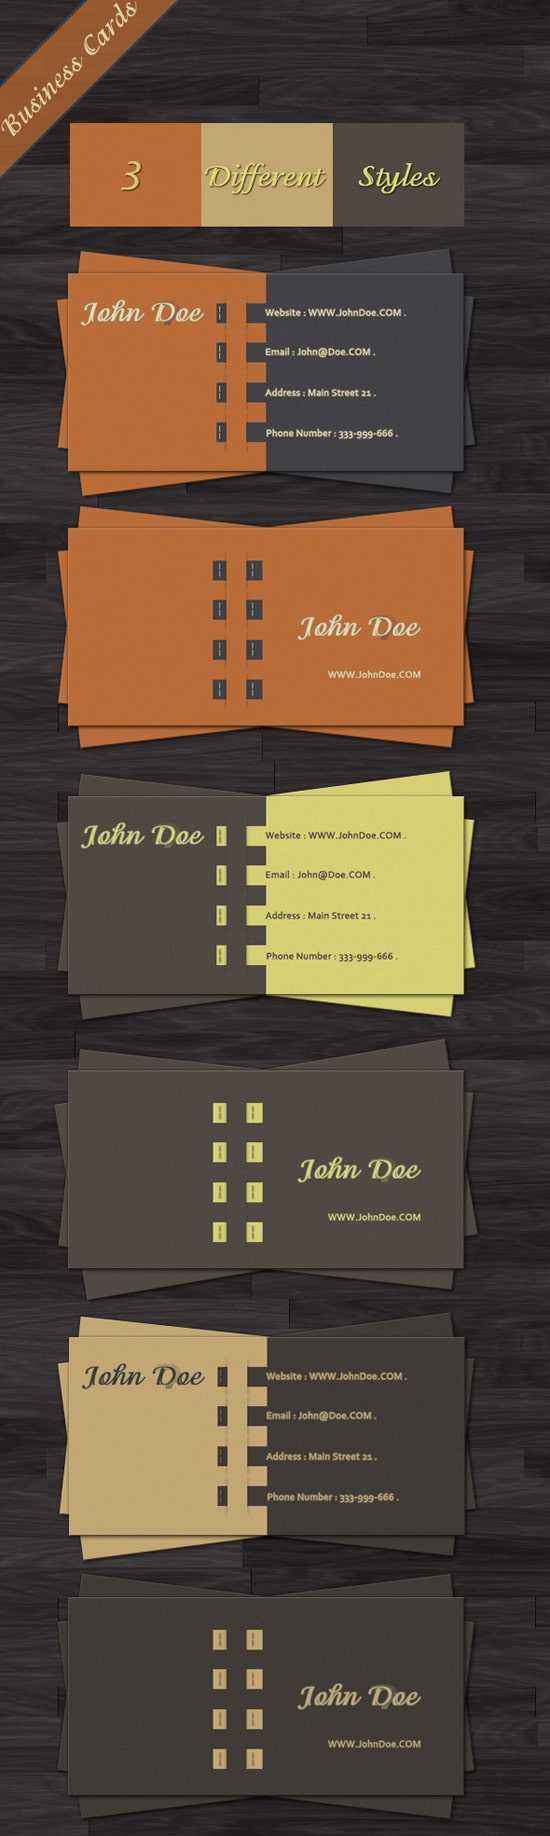 100 Free Business Card Templates – Designrfix Within Business Card Template Photoshop Cs6